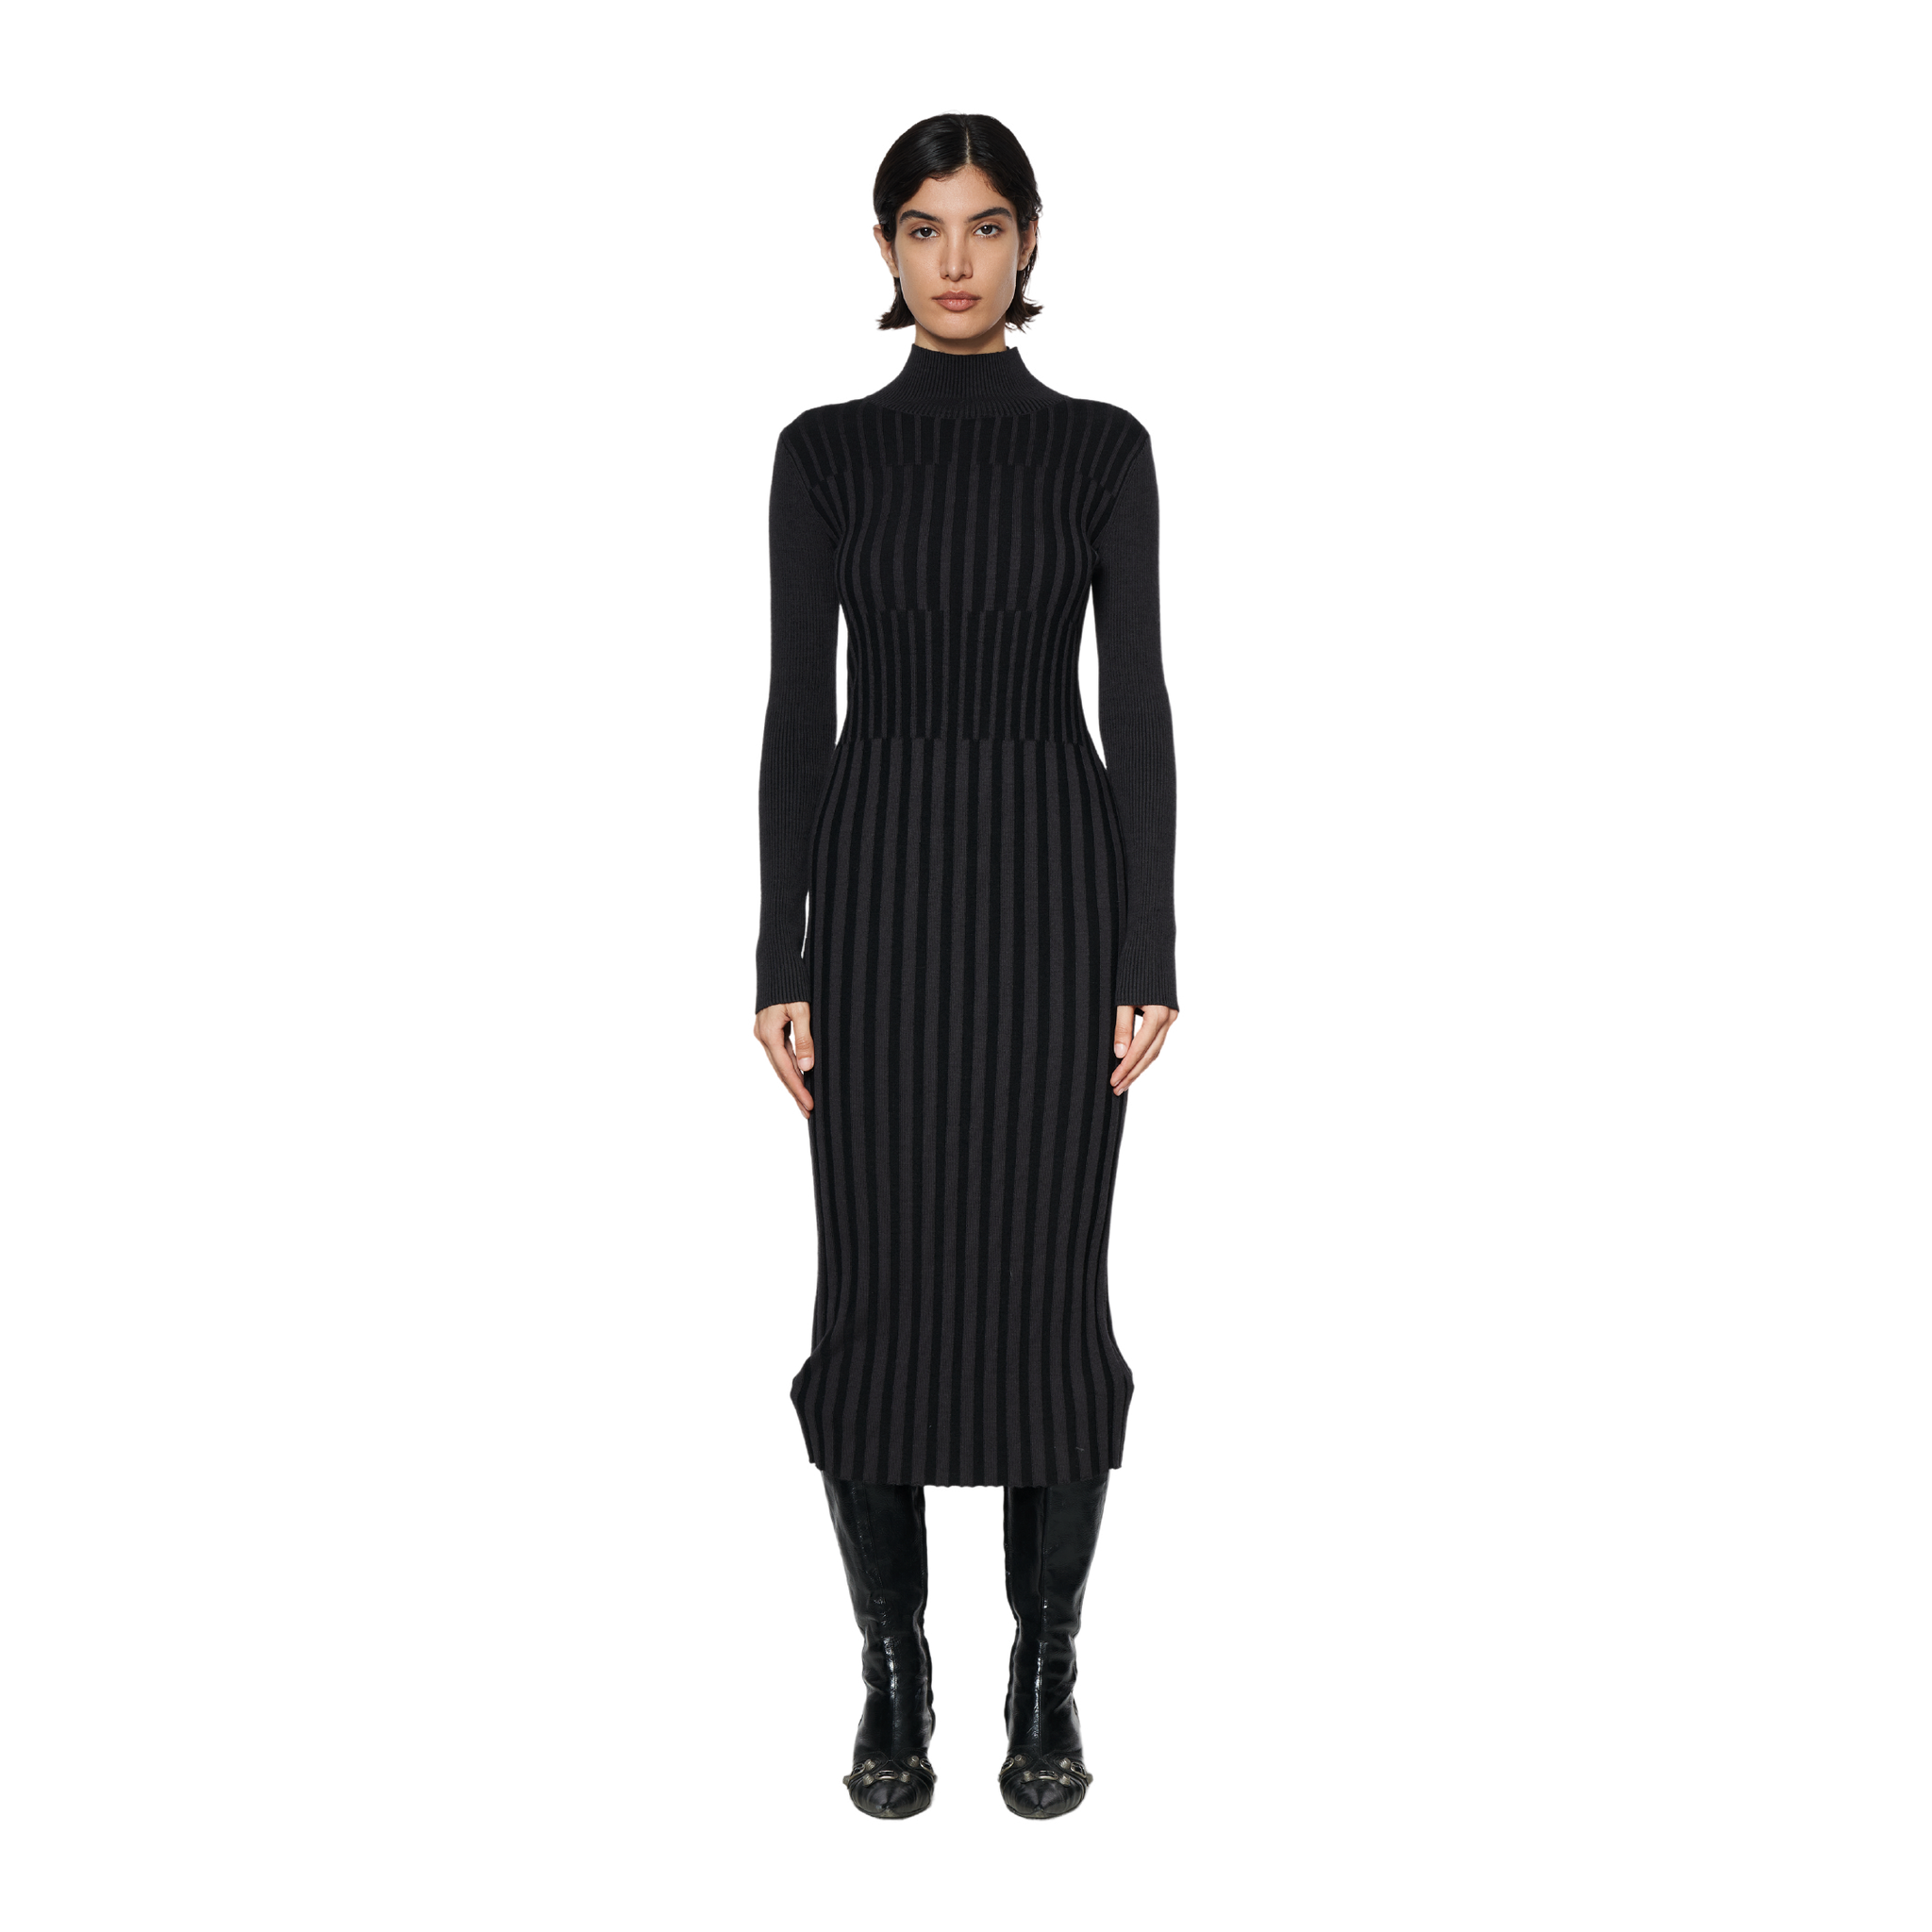 Knitted Dress With High Neck - Black/Charcoal